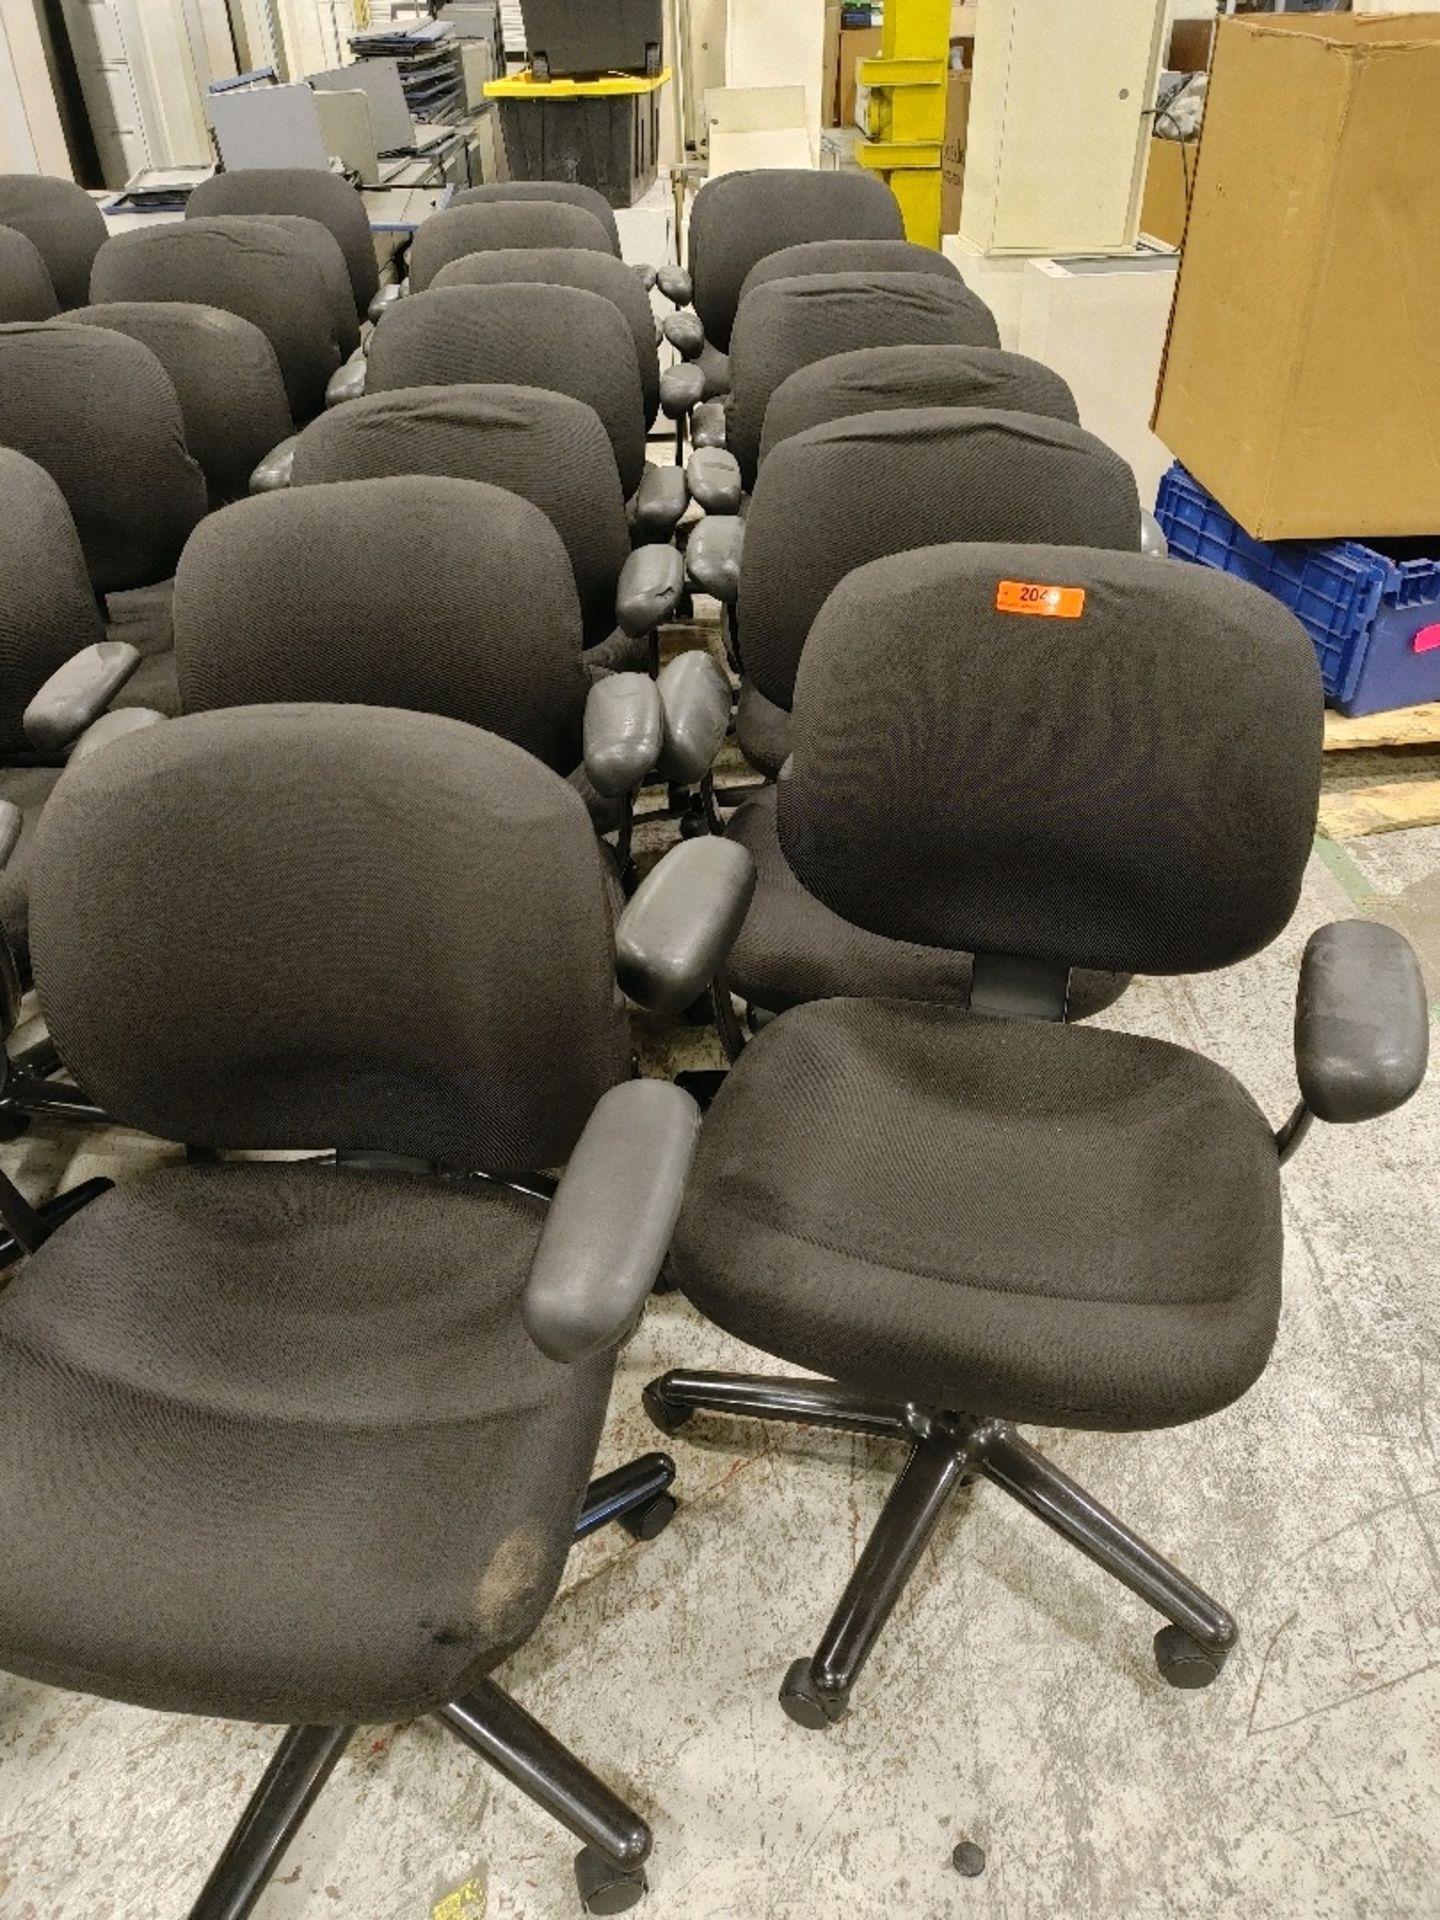 VARIOUS OFFICE ARM-CHAIRS ON WHEELS QTY: 15, LOCATED: 6101 N. 64TH STREET MILWAUKEE, WI 53218